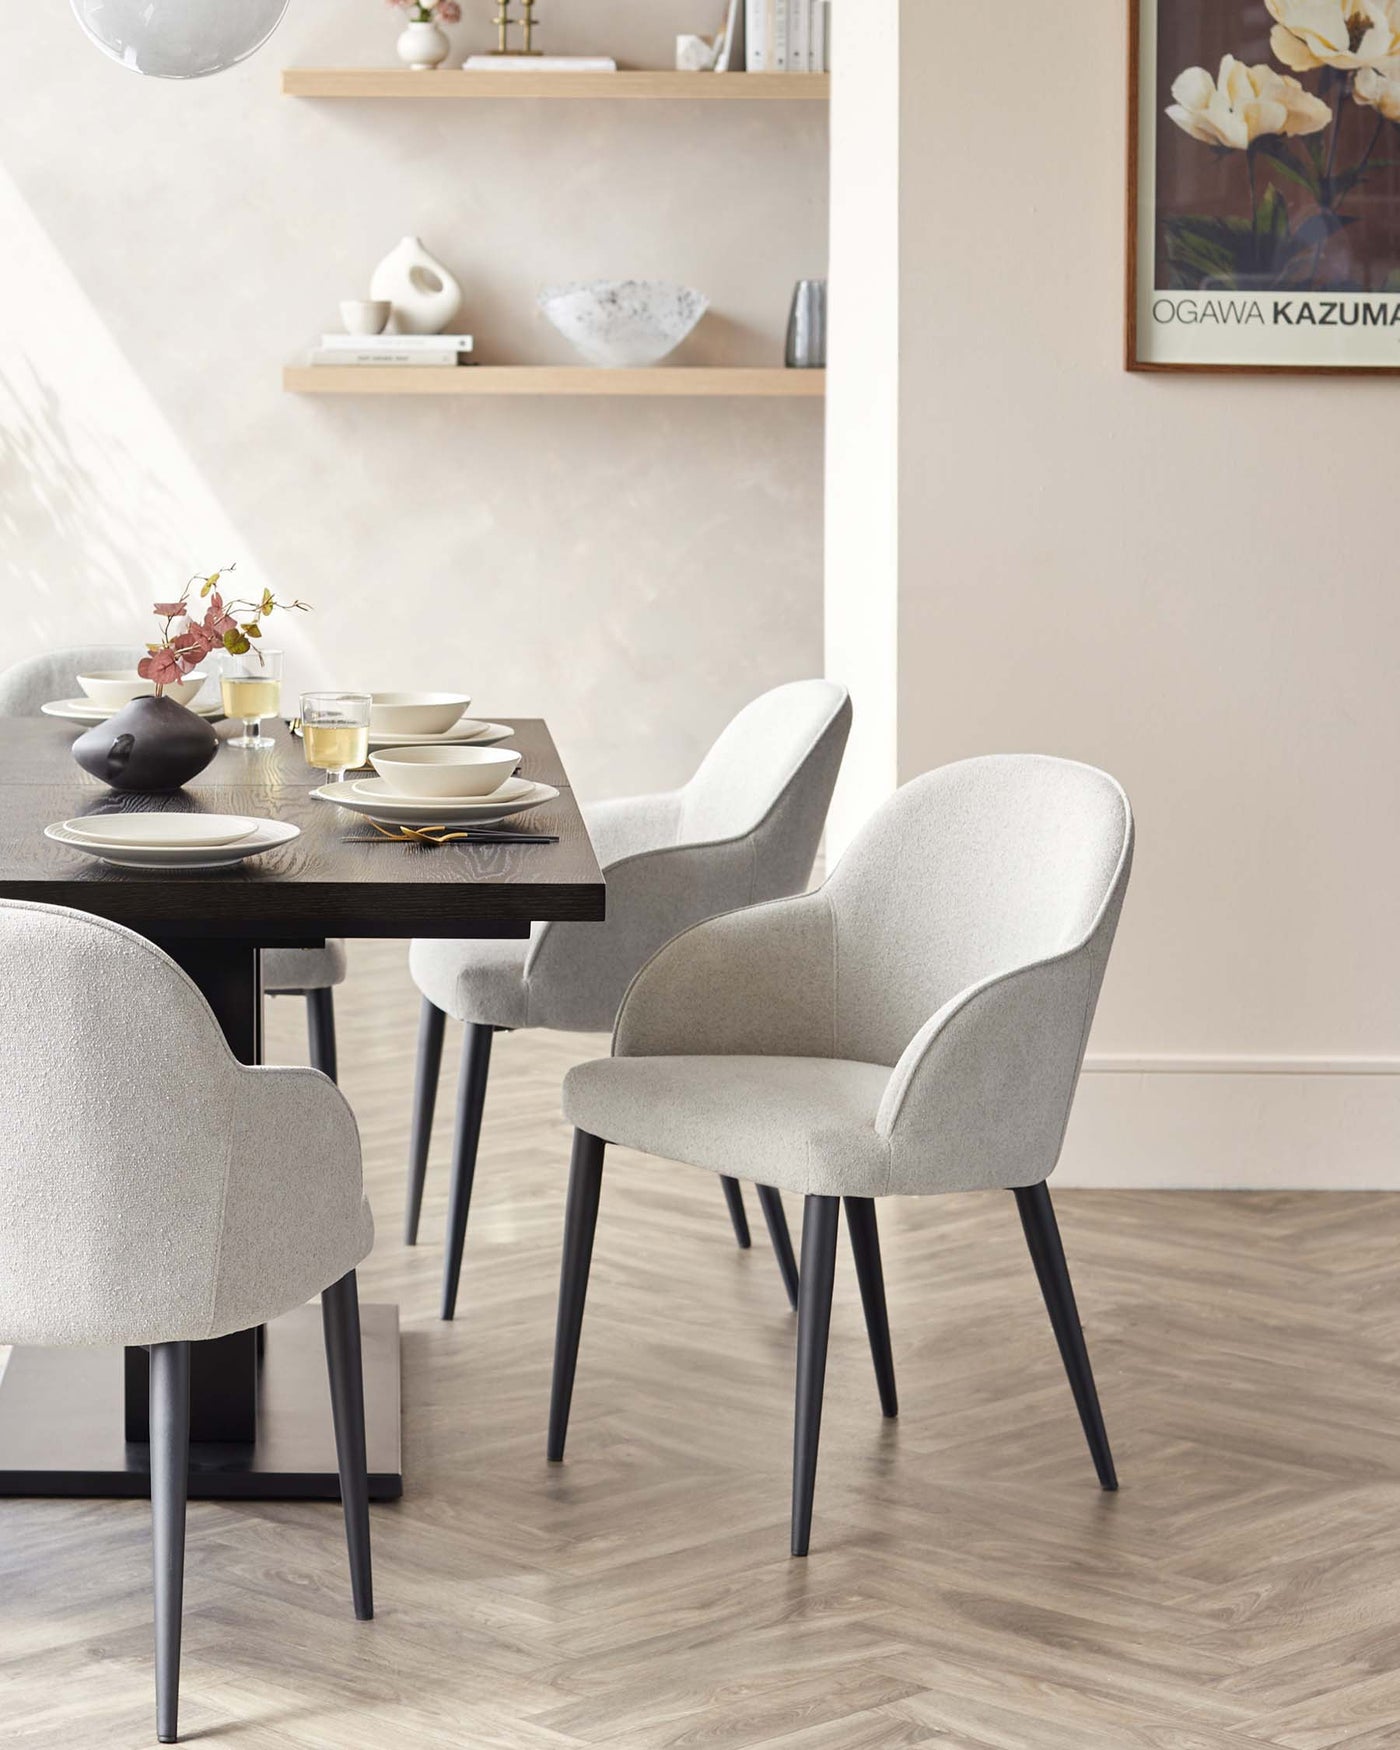 A contemporary dining set featuring a dark wooden table with a textured finish and angled, black legs. Accompanied by three light grey upholstered chairs with a smooth, curved design and slender black legs that coordinate with the table. The chairs have a slightly winged backrest and armless construction, providing a modern yet comfortable seating experience. The table is set with simple white and dark plates, bowls, and glassware.